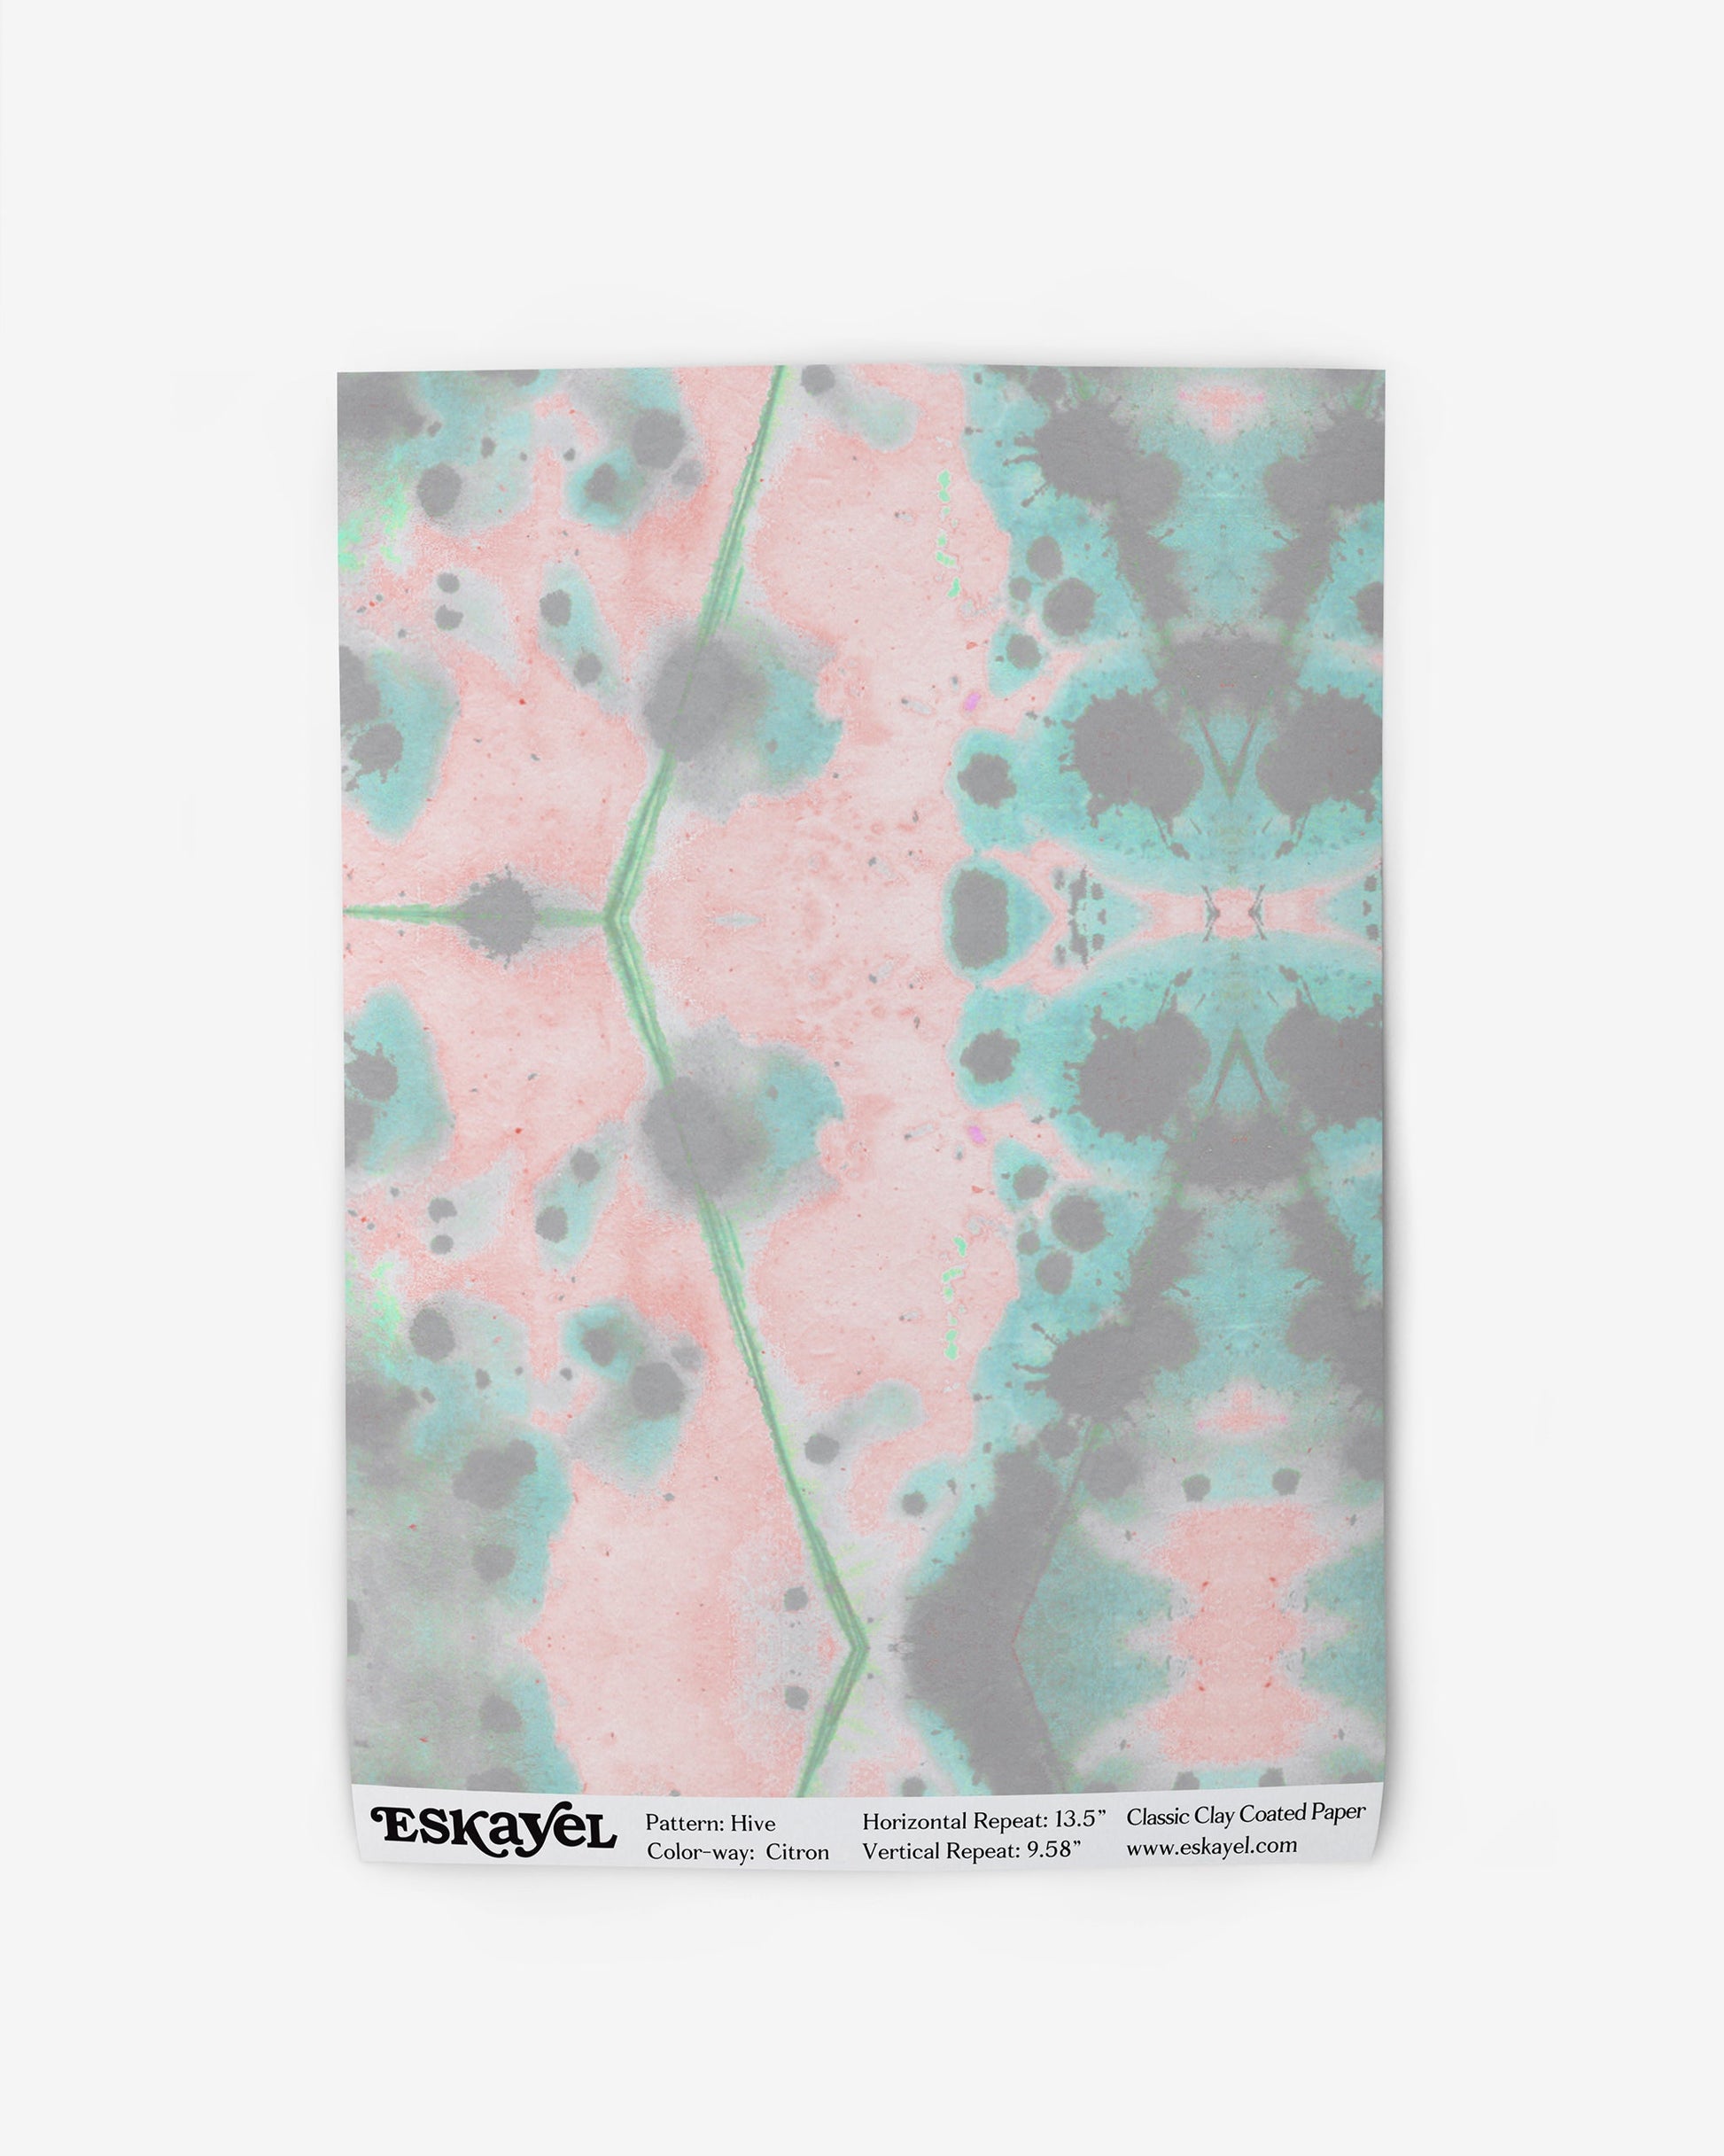 A pink, green, and blue Hive Wallpaper in the Citron colorway creates an abstract design by Eskayel